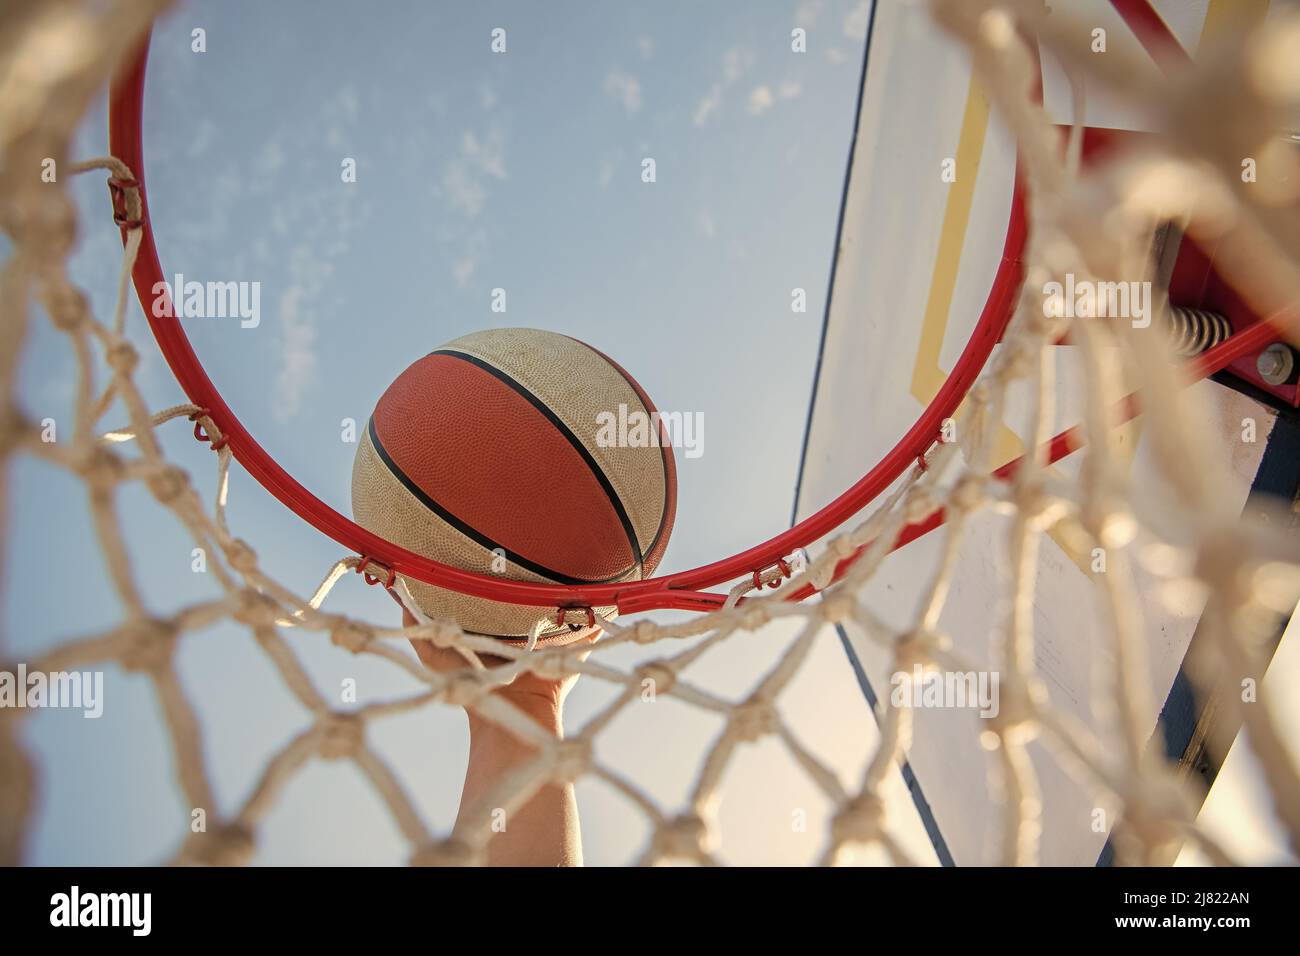 man throwing the ball in hoop. hands and basketball. dunk in basket. slam dunk in motion Stock Photo